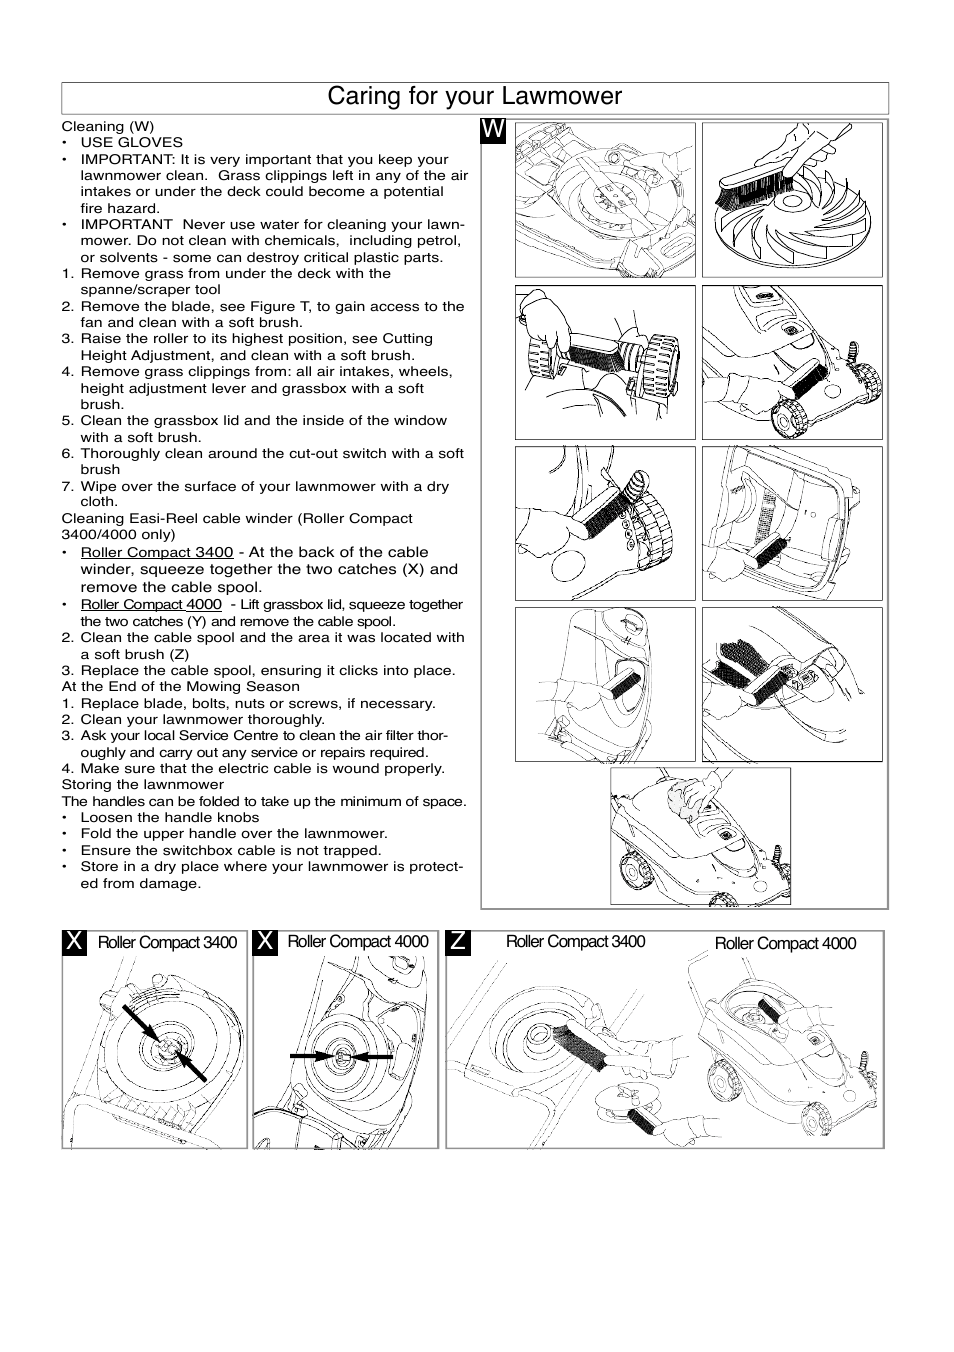 Caring for your lawmower | Flymo ROLLER COMPACT 4000 User Manual | Page 7 /  9 | Original mode